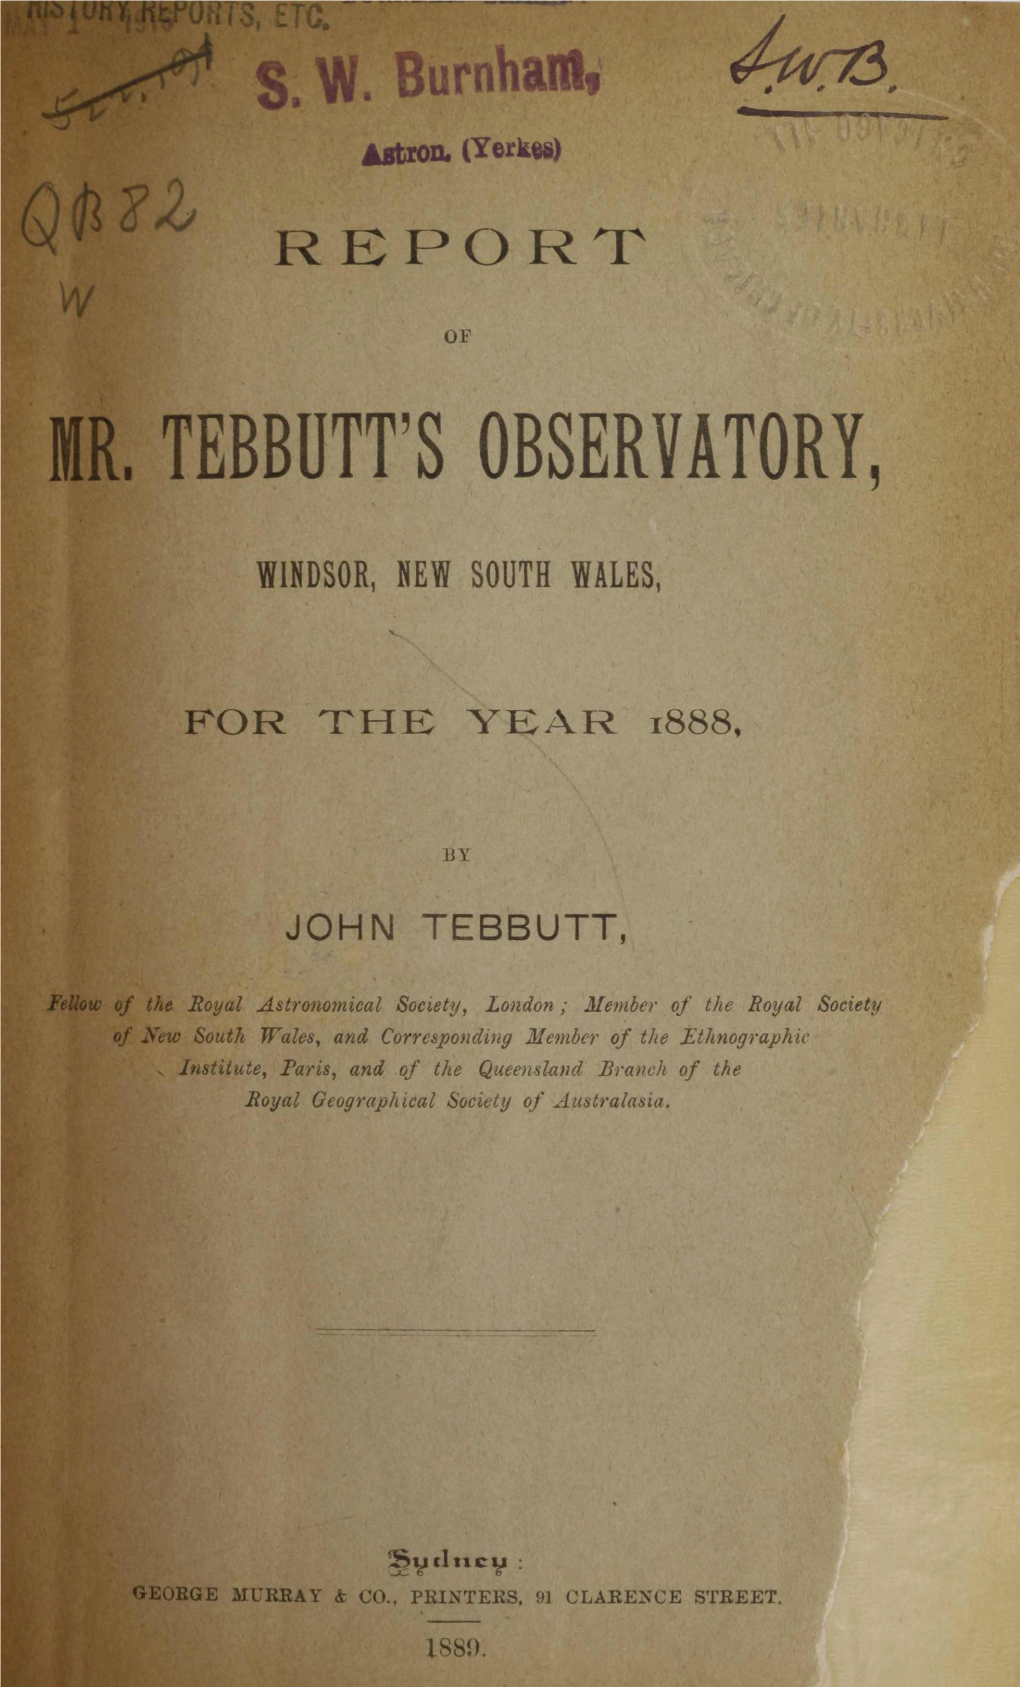 OF MR. TEBBUTT's OBSERVATORY, Fellow of the Royal Astronomical Society, Londo